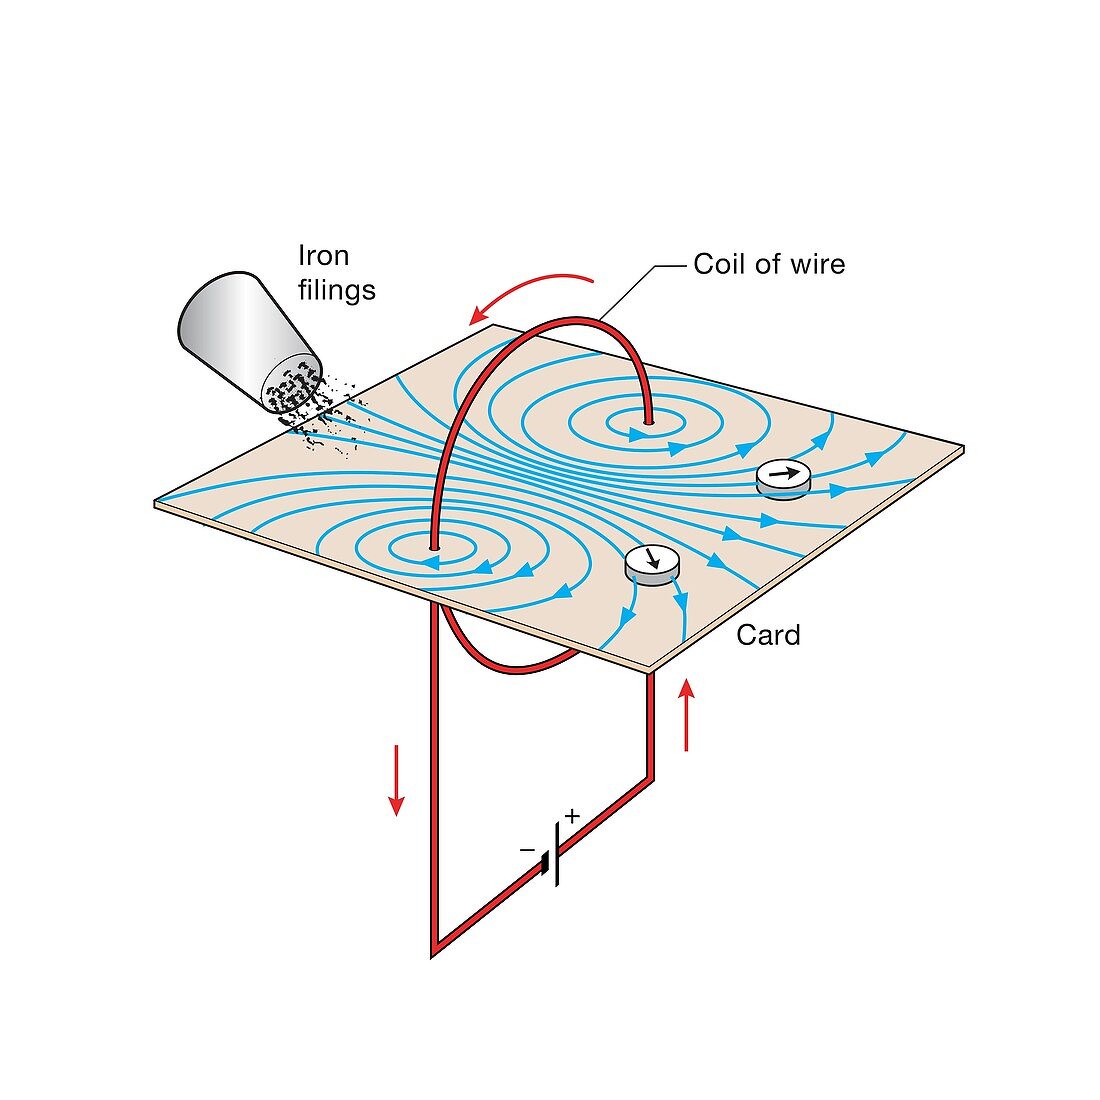 Magnetic field round a coil of wire, illustration